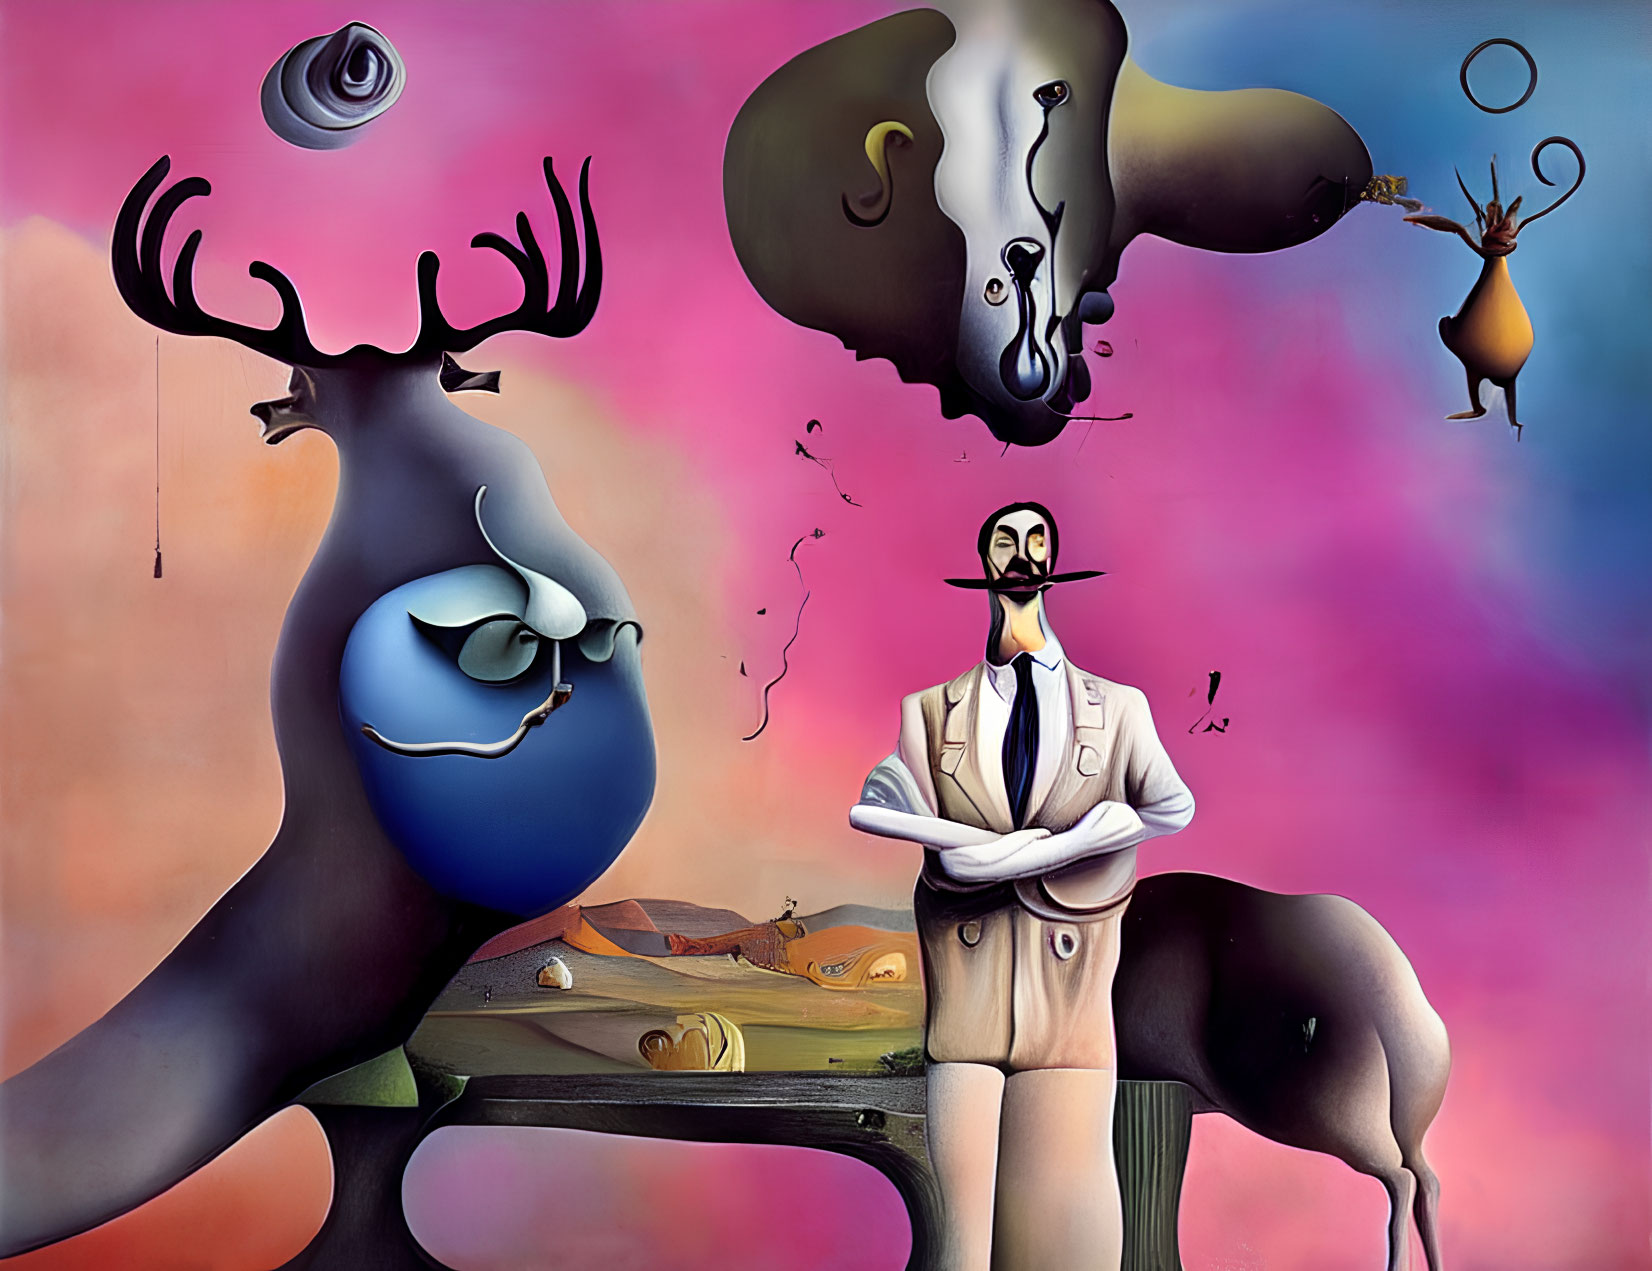 Surrealistic painting of humanoid figure in suit with mustache and floating objects on pink sky